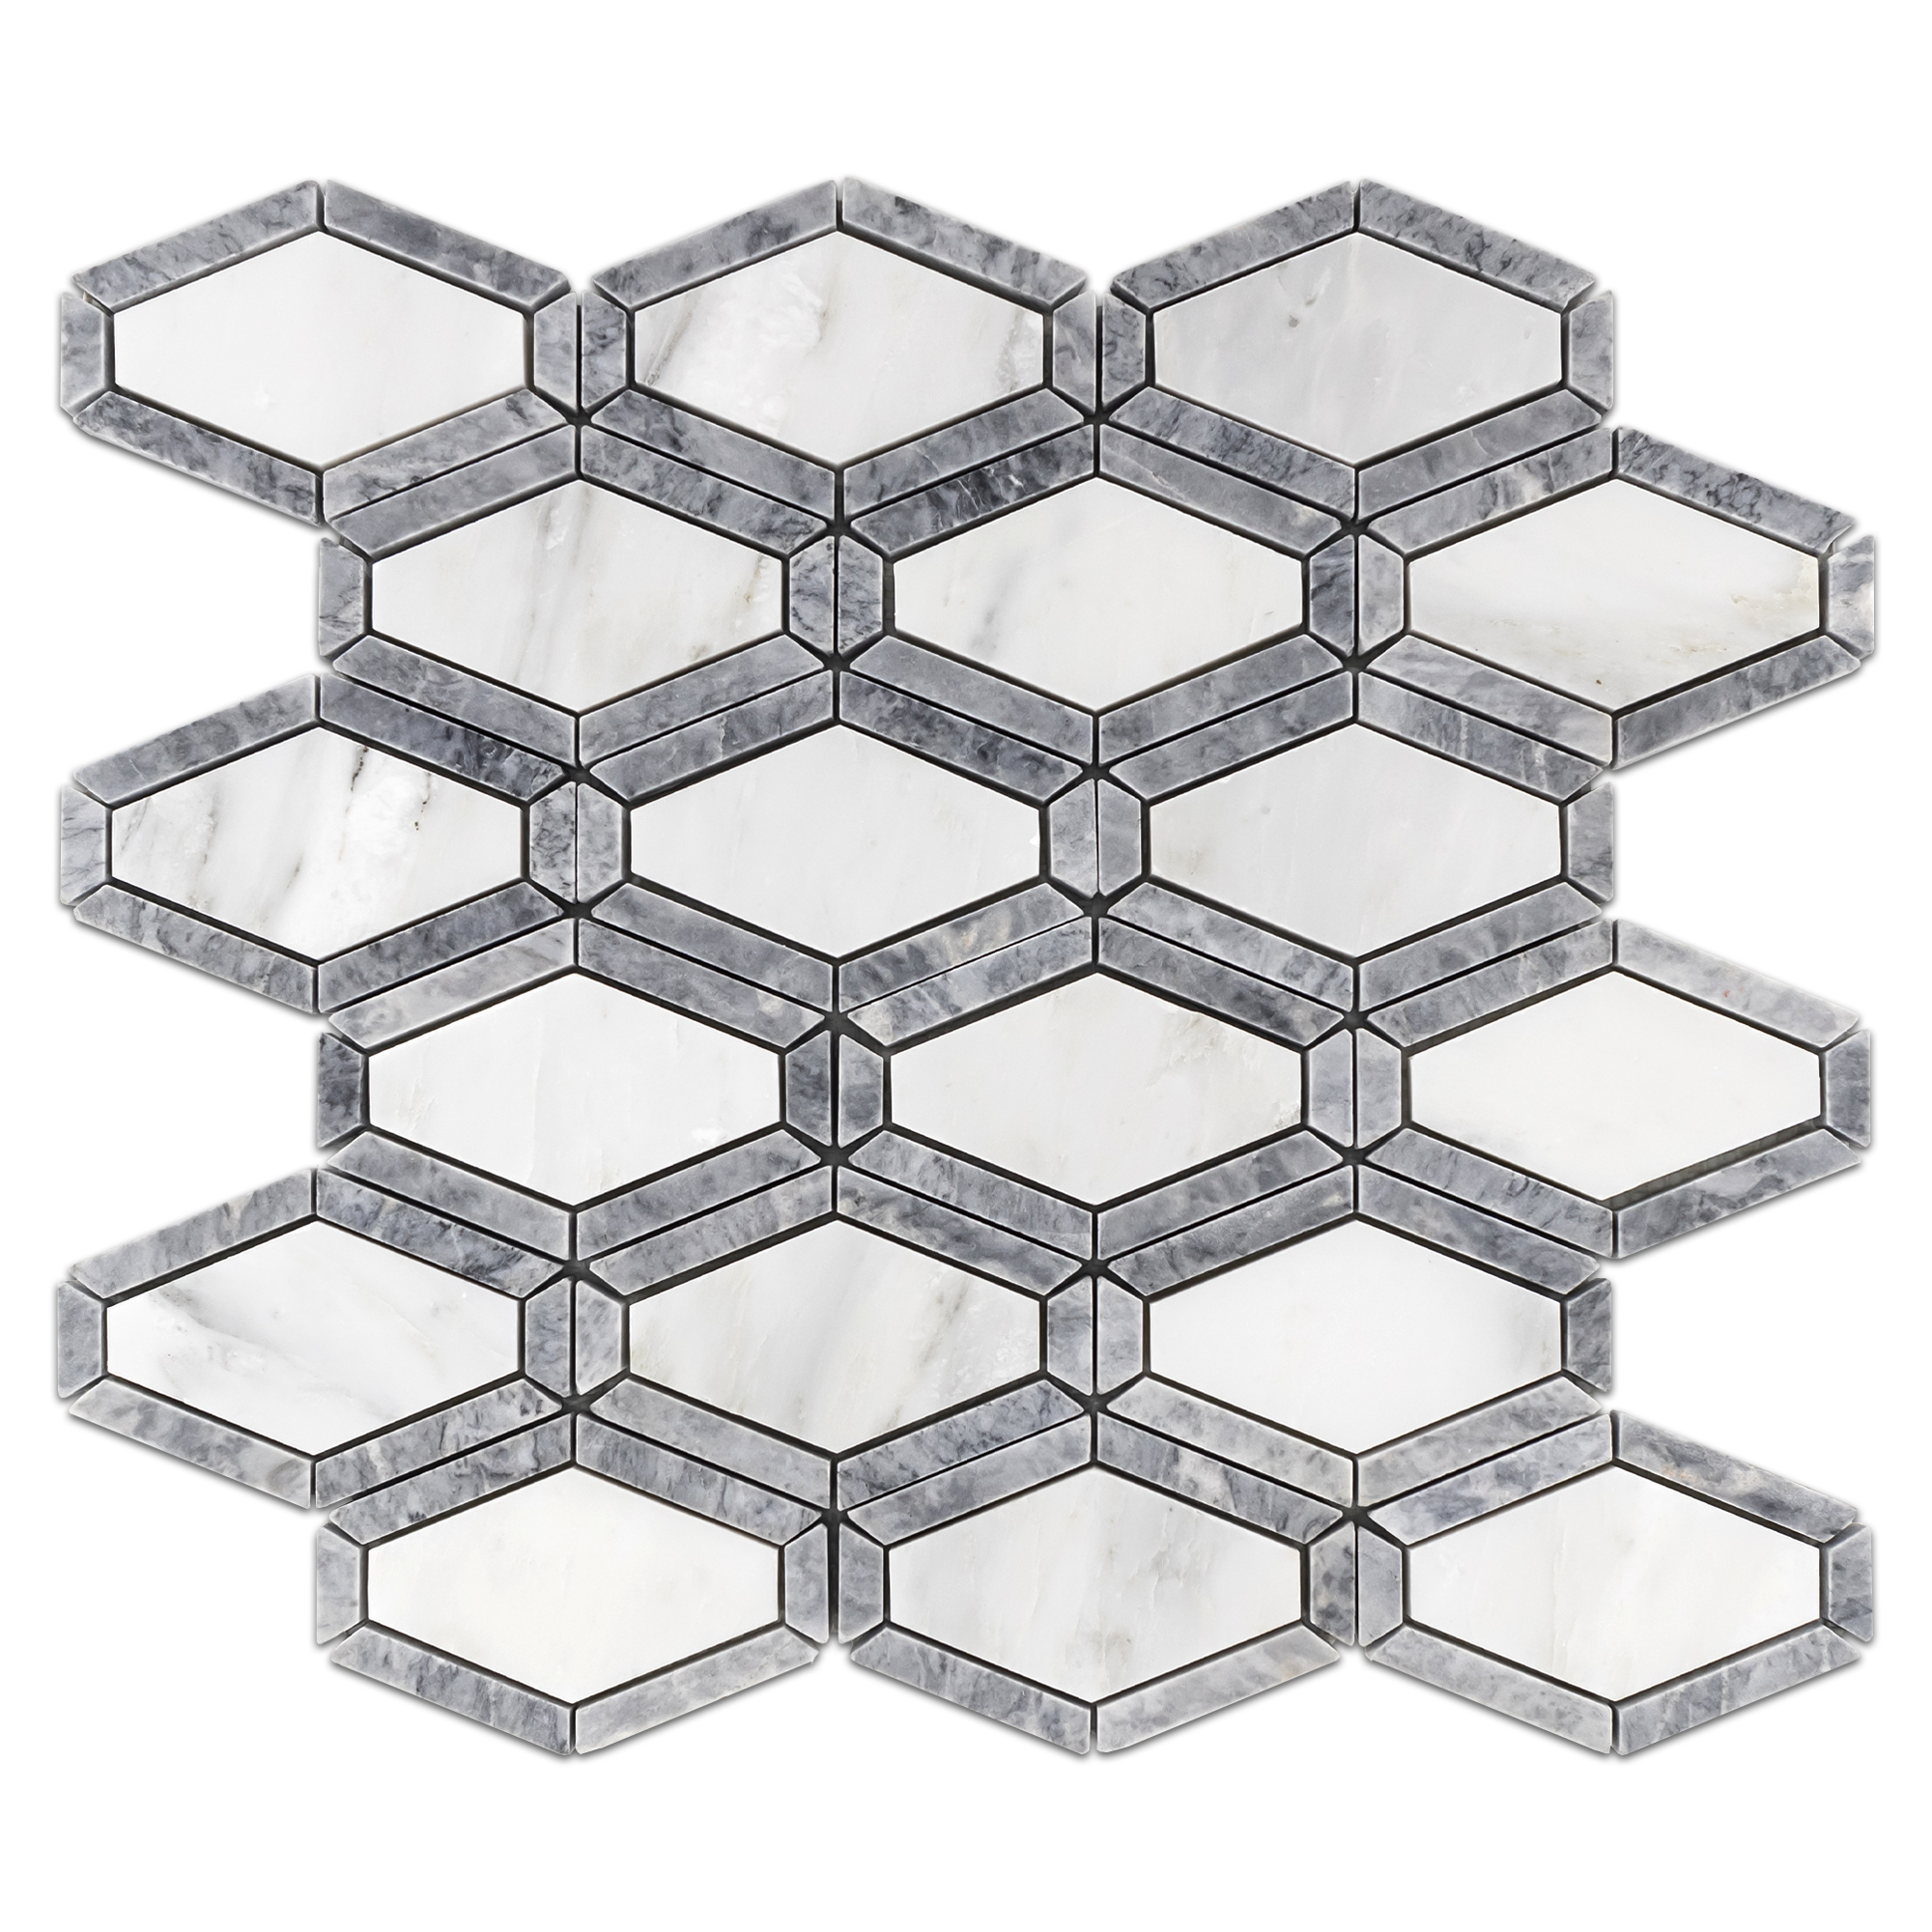 Elon Pearl White Pacific Gray Marble Framed Long Hex Field Mosaic 12.75x13.375x0.375 Honed AM8636H Surface Group International Product